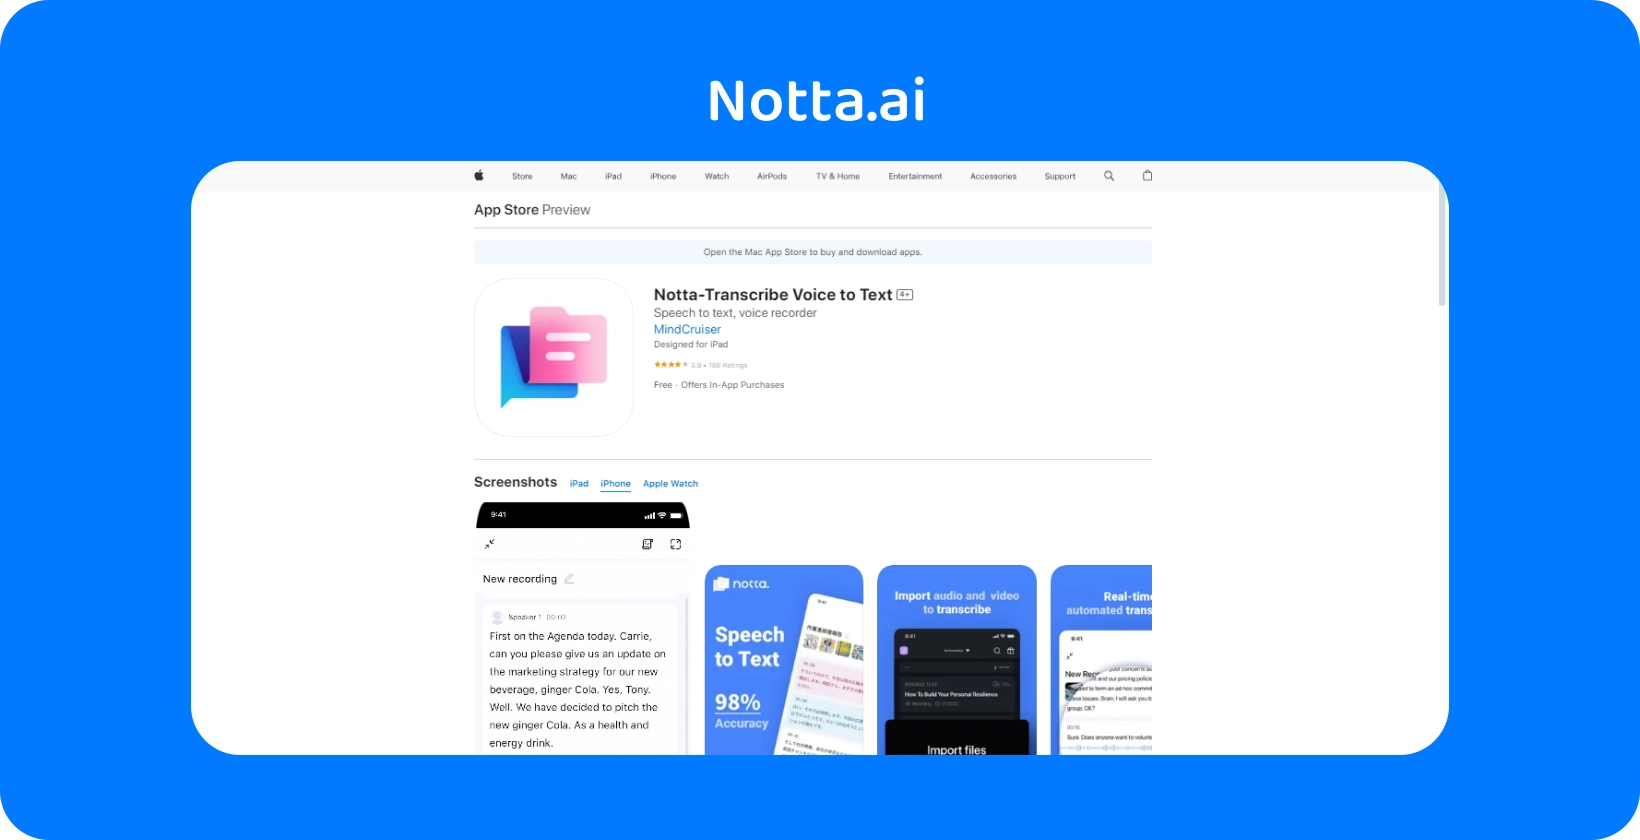 Nota.ai's App Store preview with new features for converting voice to text with AI accuracy showcased.